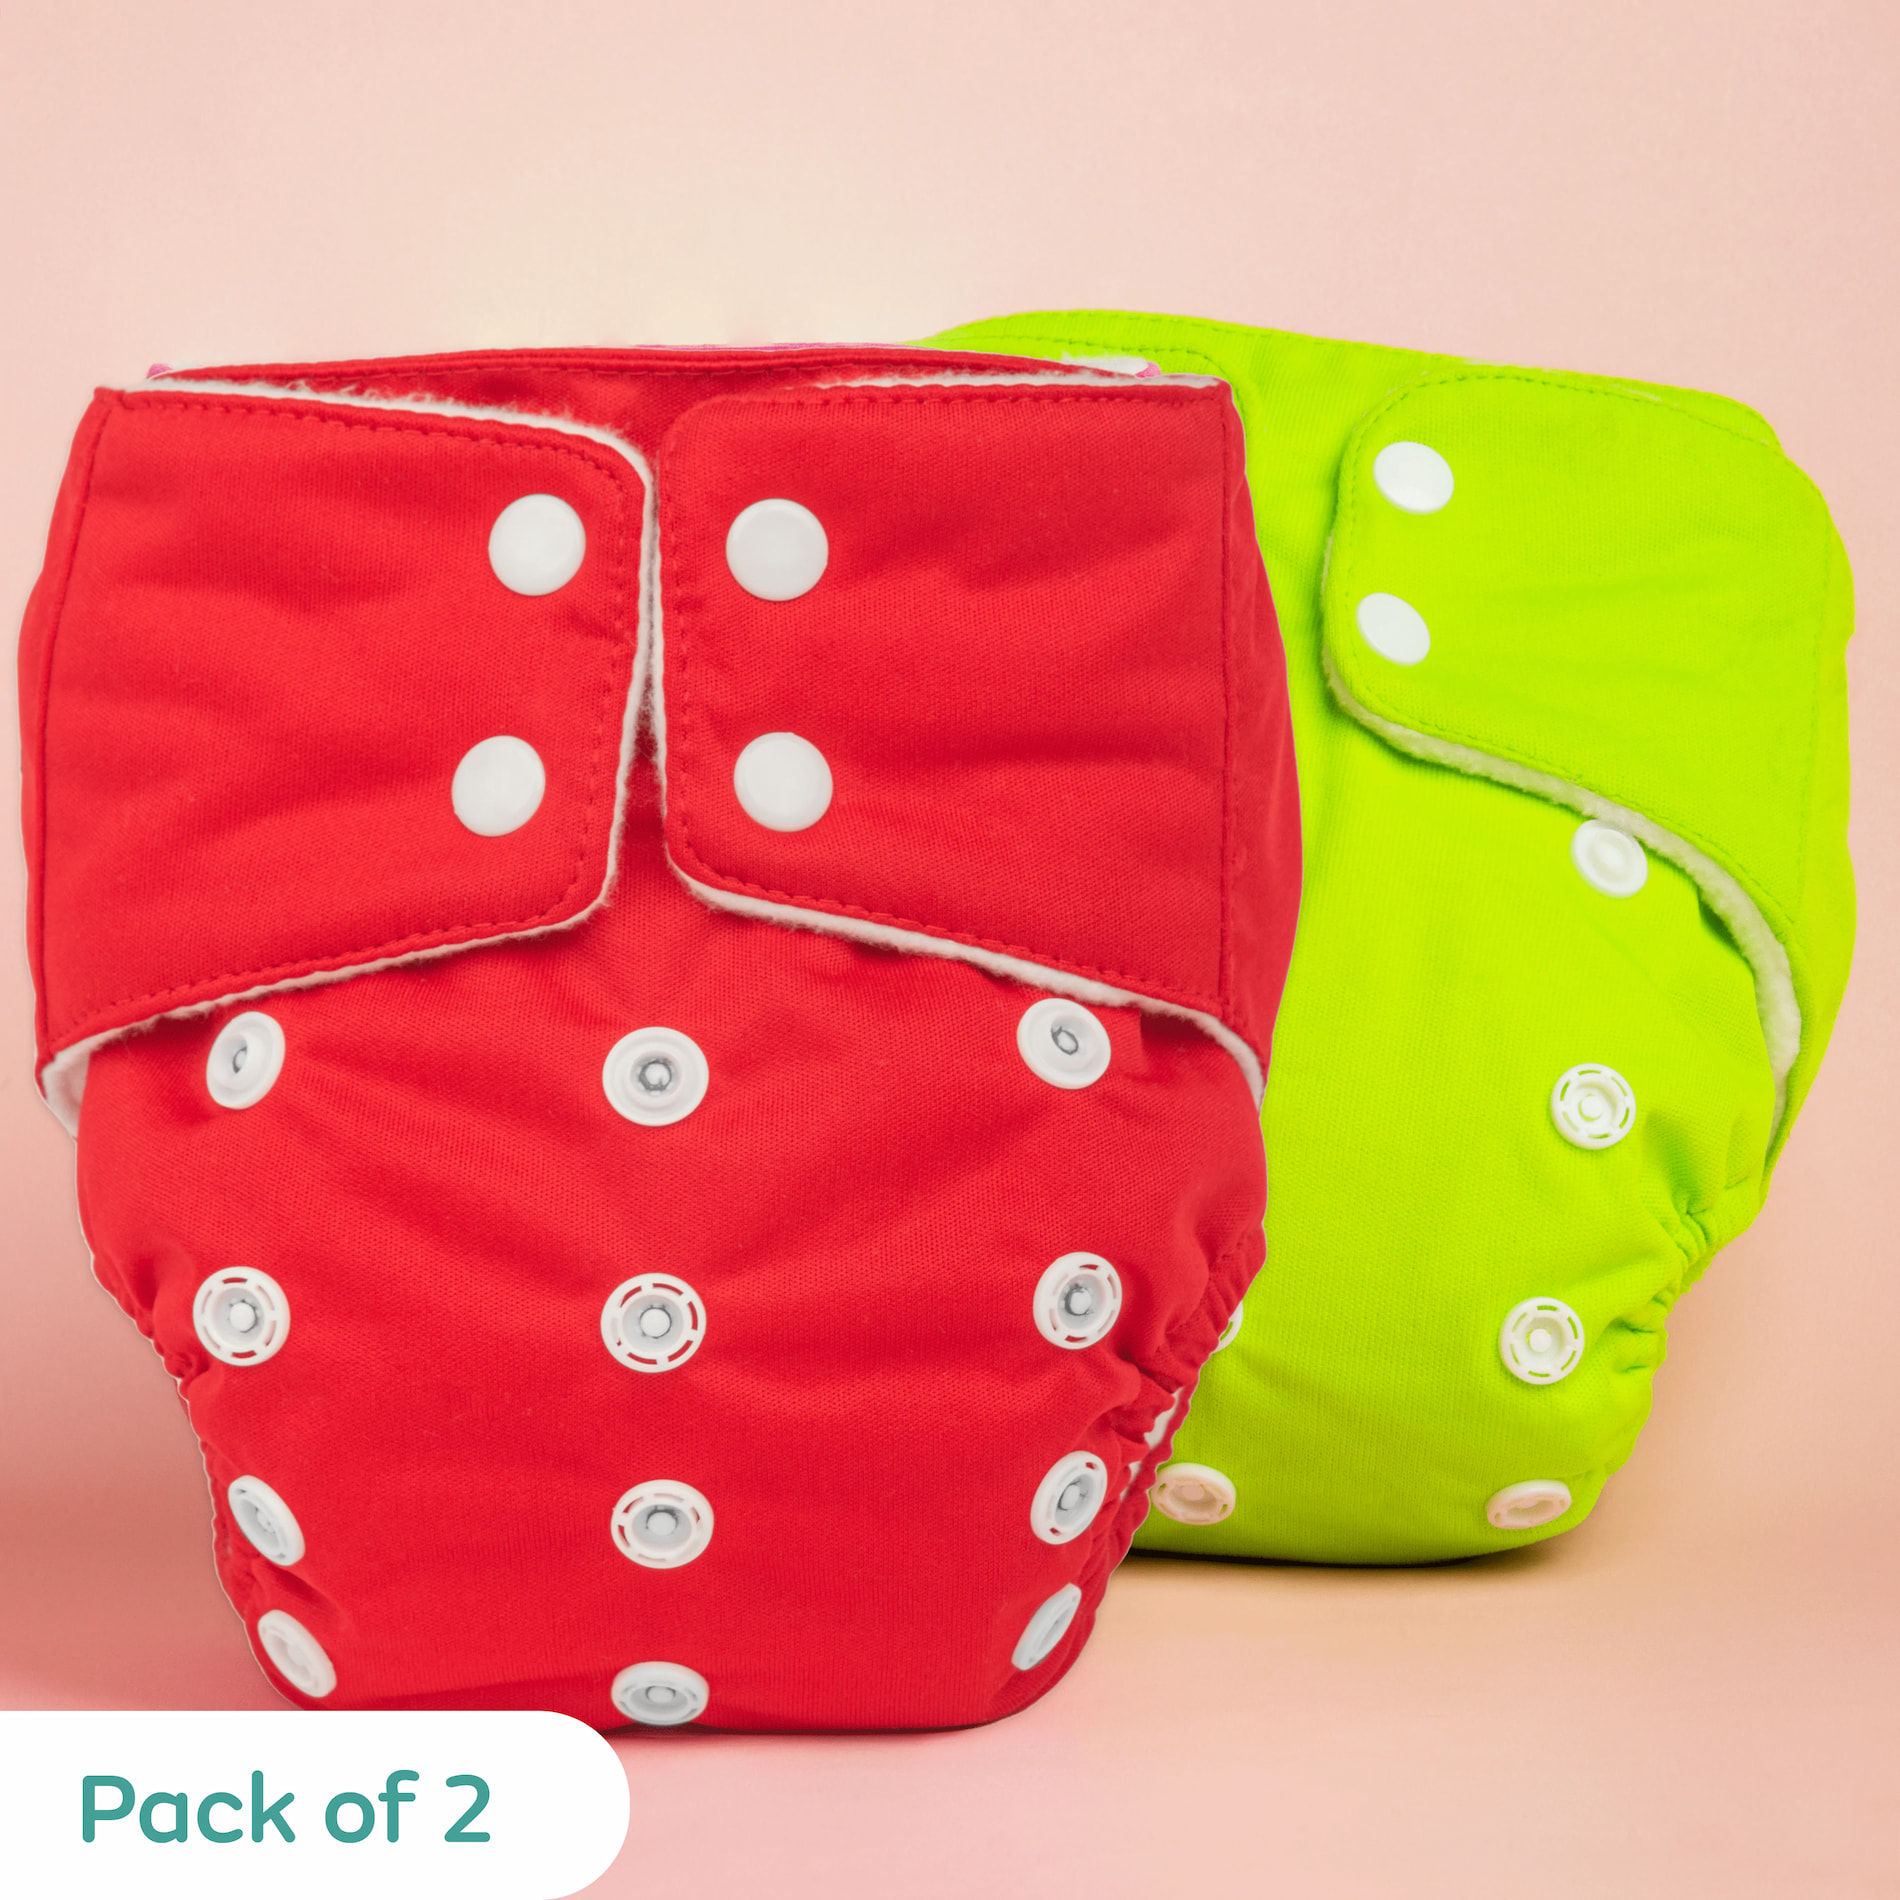 Adjustable Washable & Reusable Cloth Diaper With Dry Feel, Absorbent Insert Pad (3M-3Y) | Oeko-Tex Certified | Prevents Rashes - Red & Green - Pack of 2